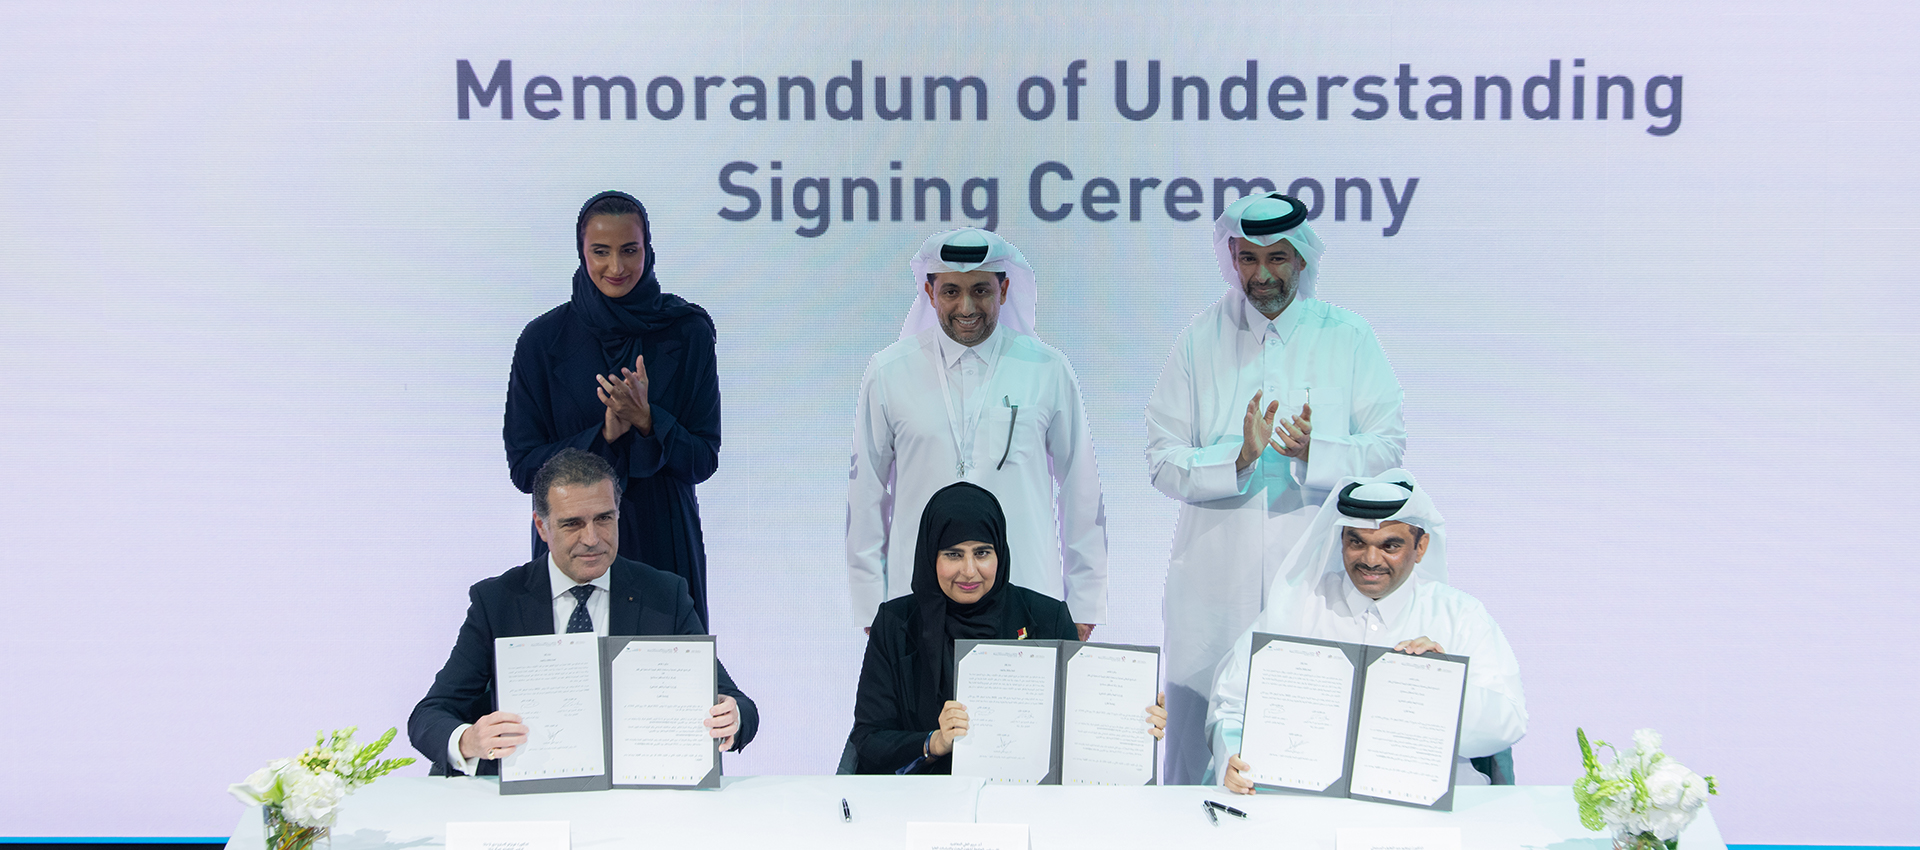 MSC Foundation joins forces with Qatar Foundation | MSC Foundation